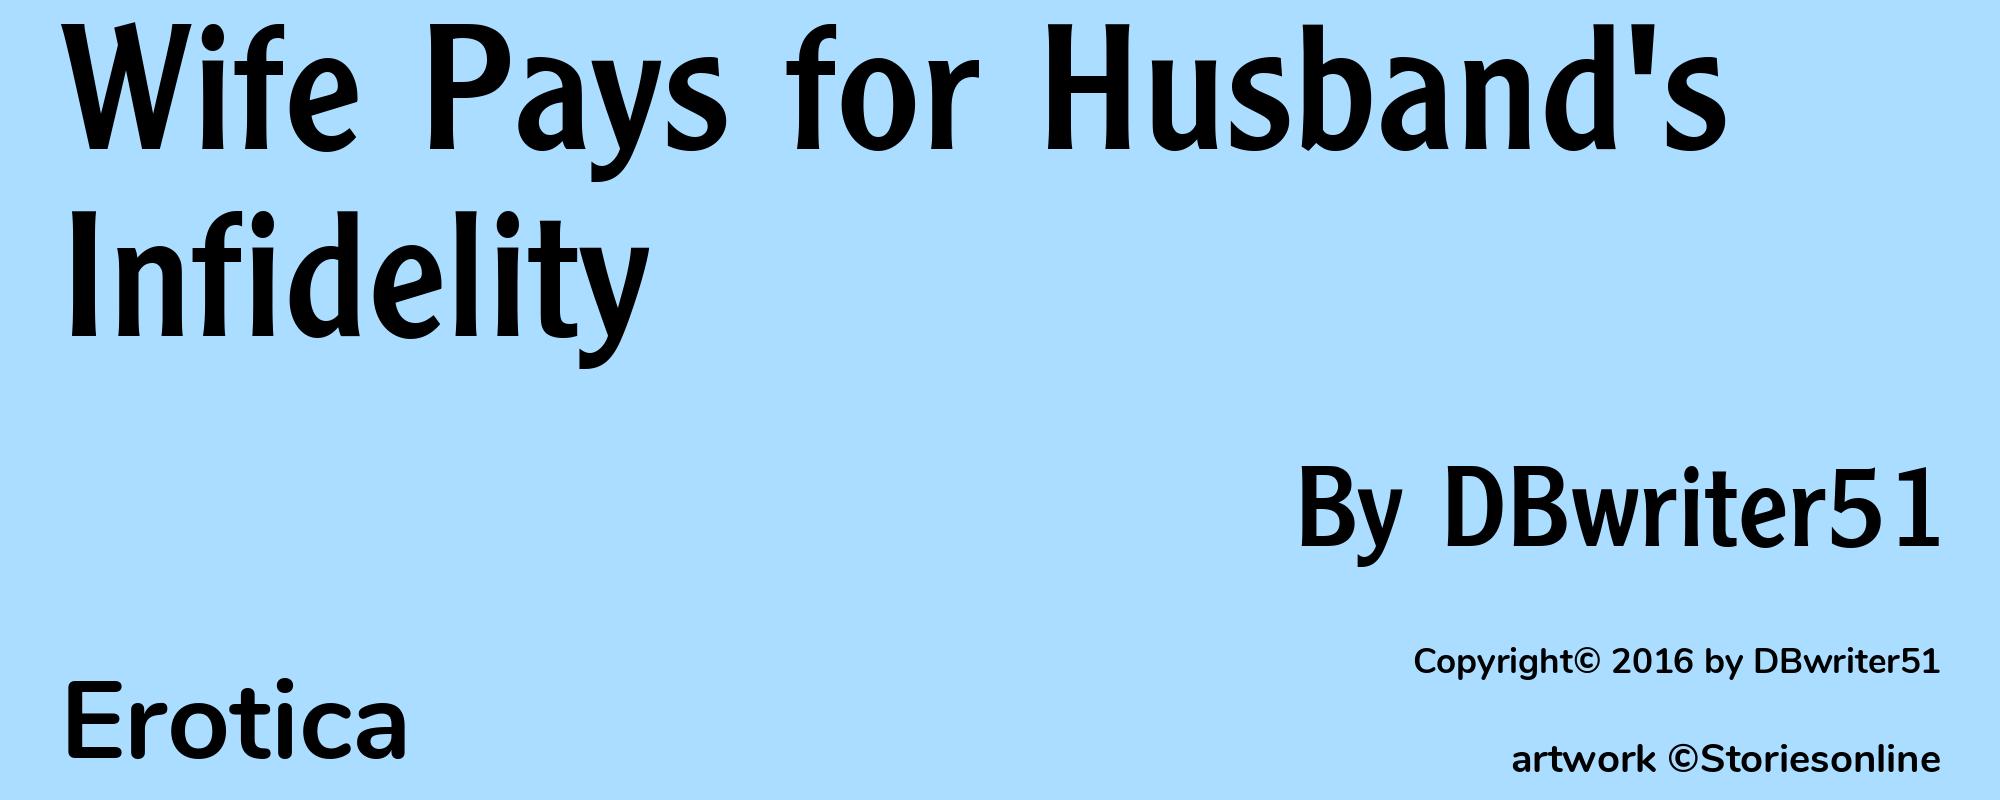 Wife Pays for Husband's Infidelity - Cover